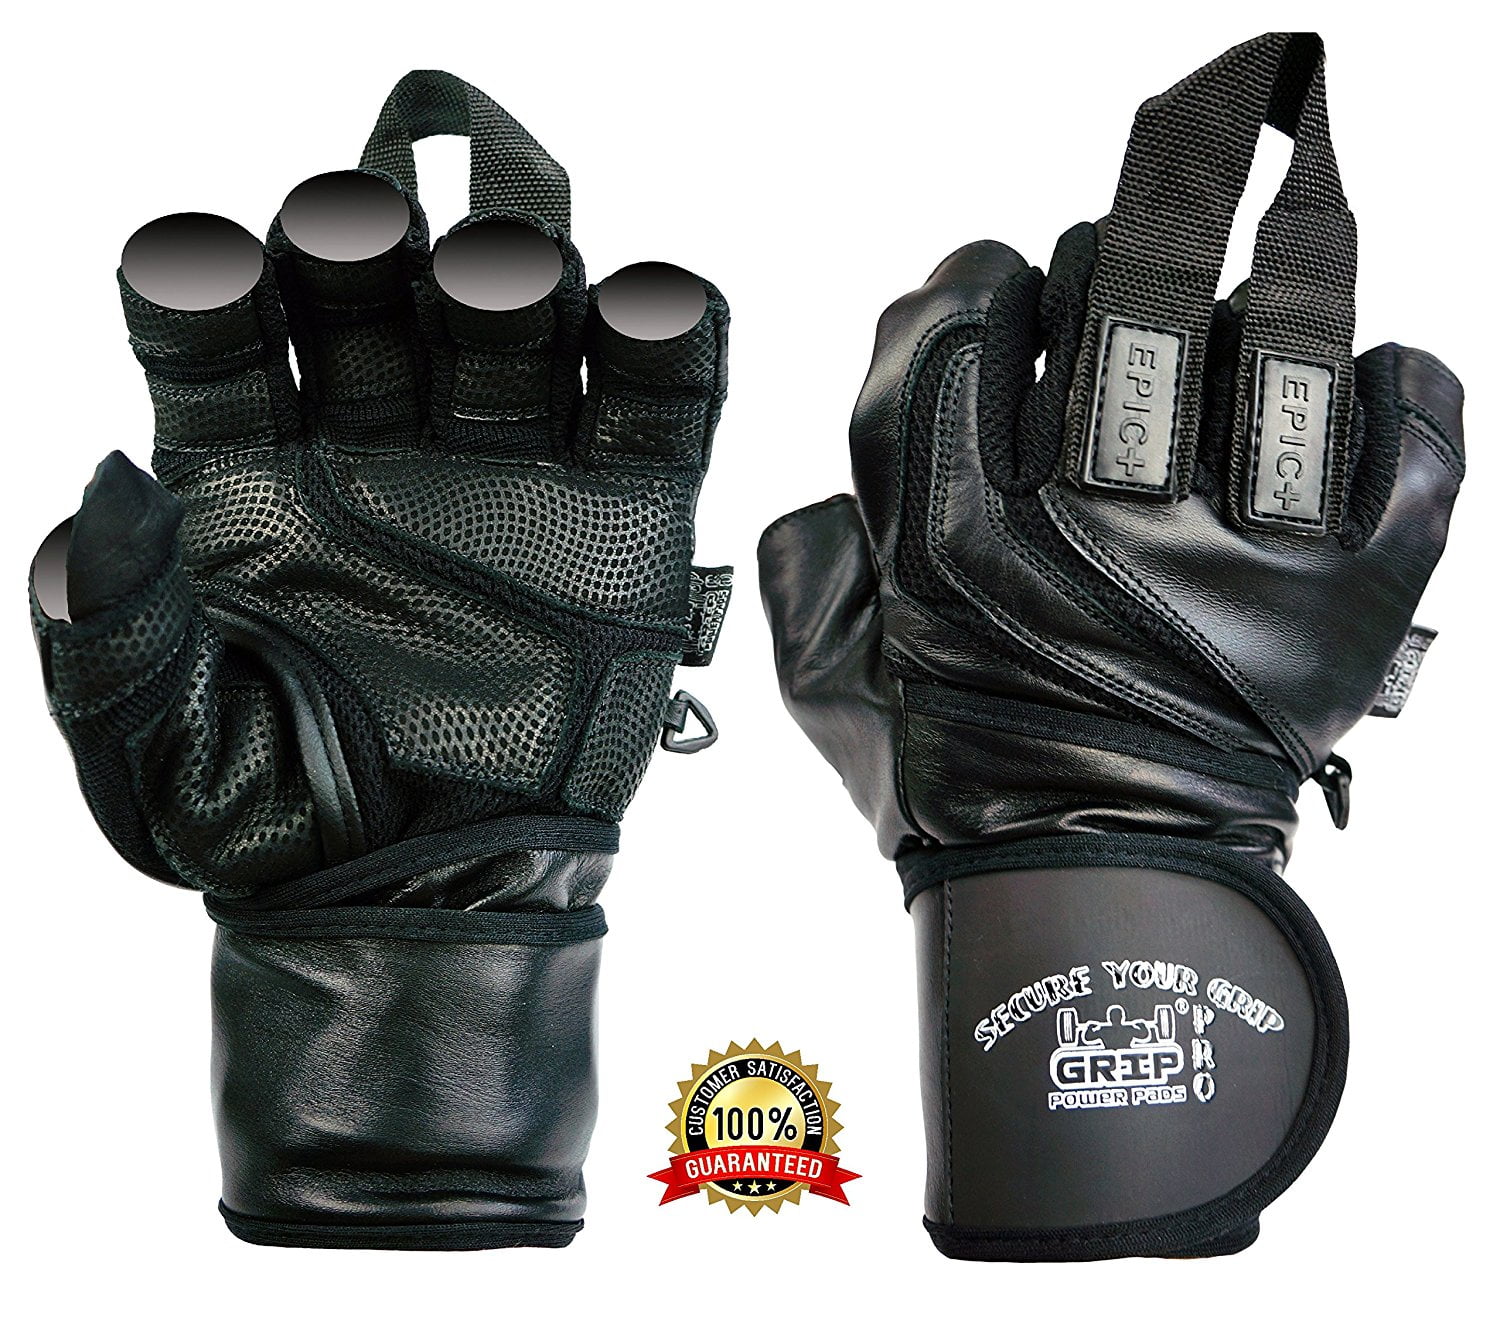 Leather Weight Lifting Gloves Long Wrist Wrap Padded Double Leather Training Gym 